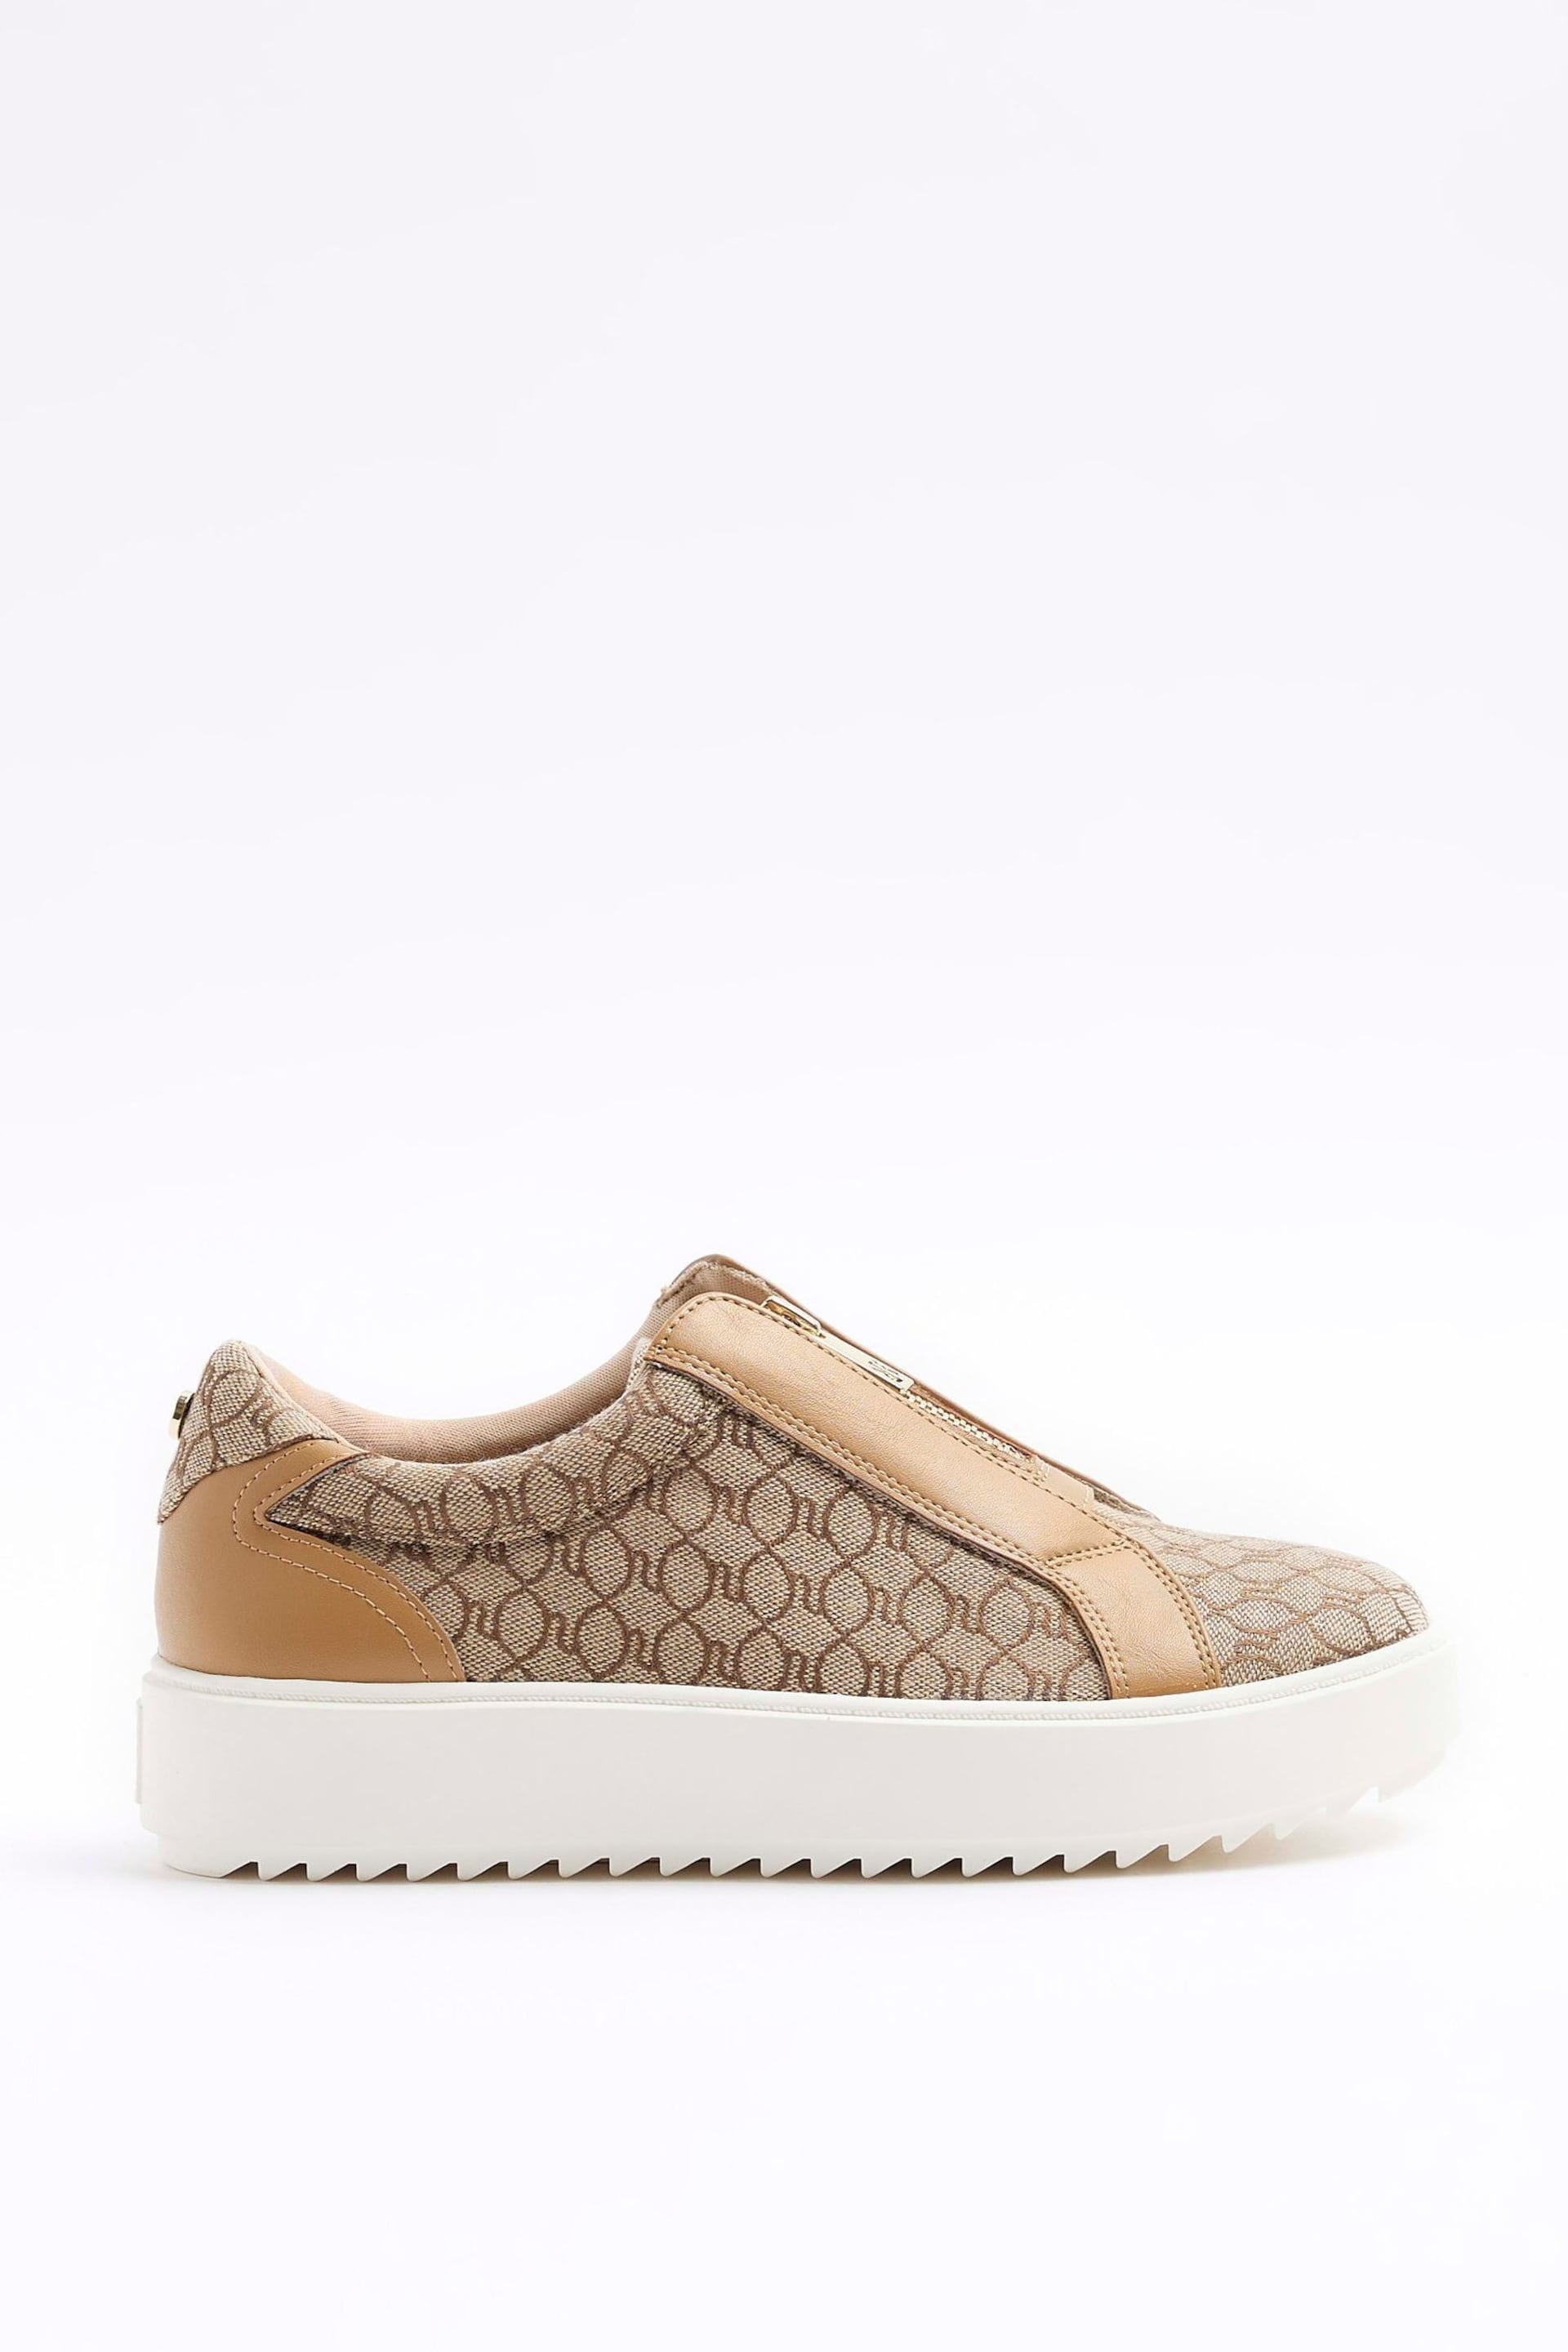 River Island Brown Slip-Ons Plimsole Trainers - Image 1 of 4